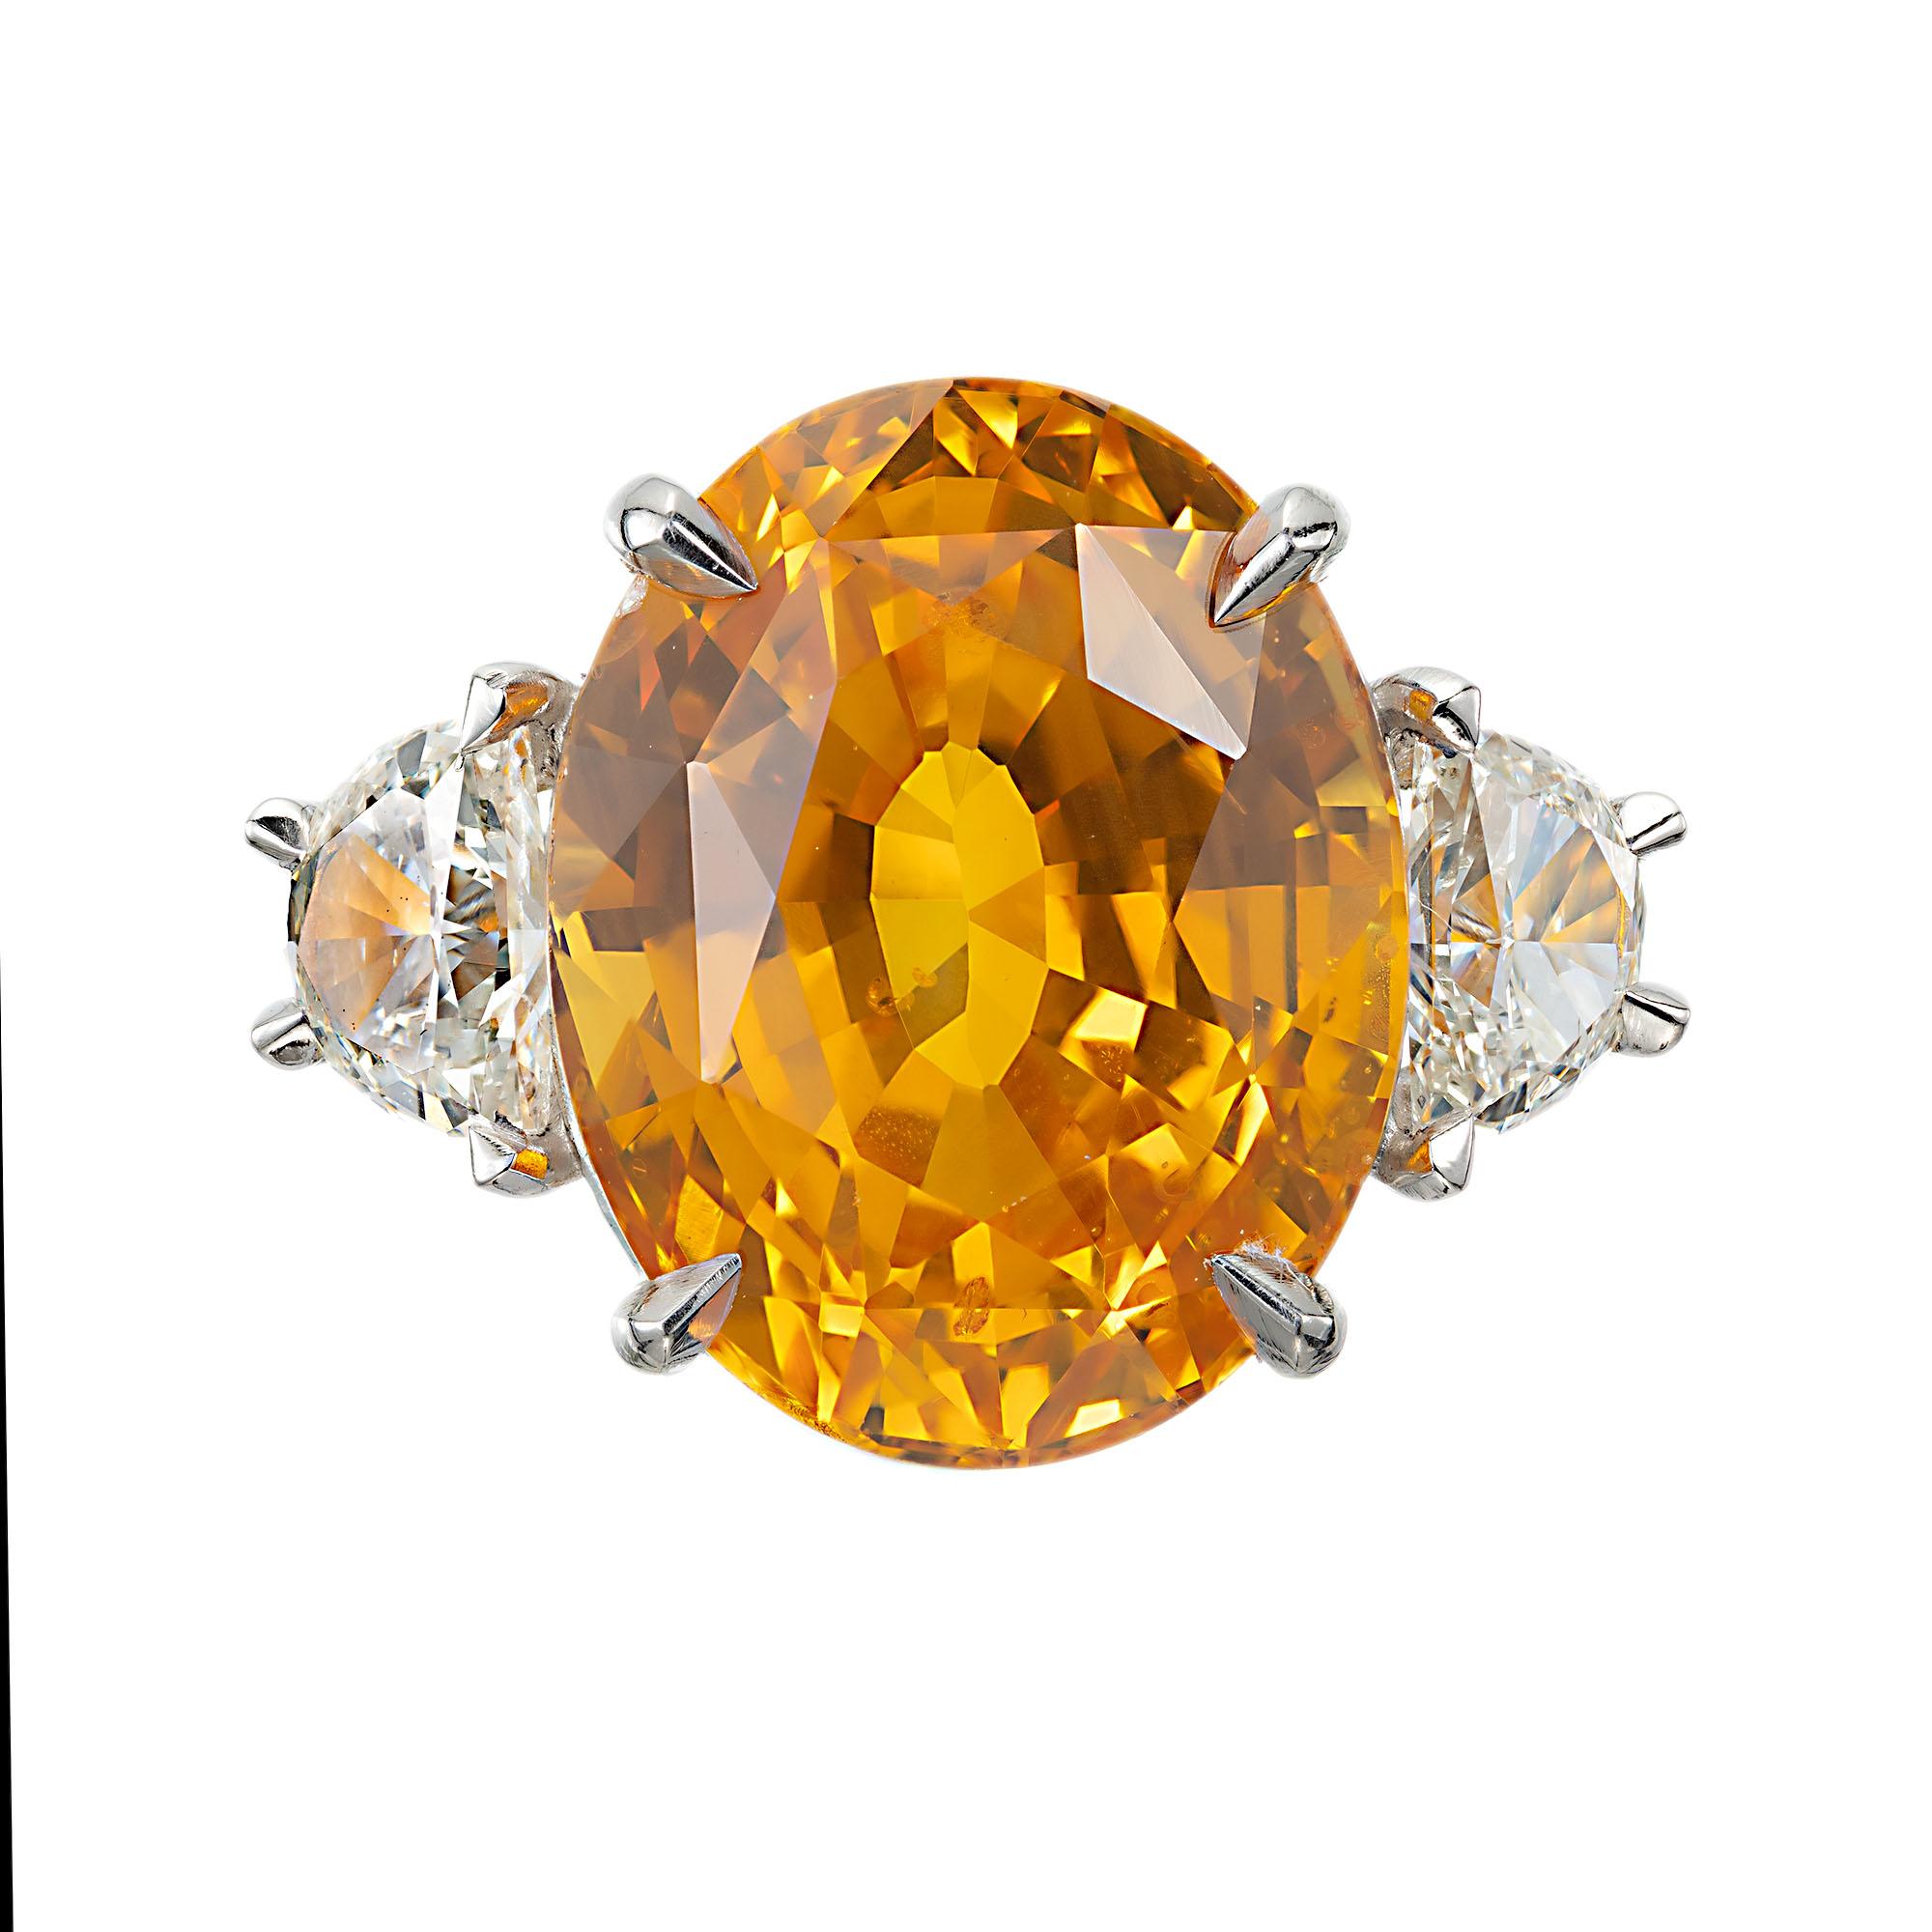 Orange and yellow oval sapphire and half moon diamond cocktail ring. GIA certified center oval center stone in a 18k yellow gold hand made setting with two half moon side diamonds. Crafted in the Peter Suchy Workshop. 

1 oval brilliant step cut